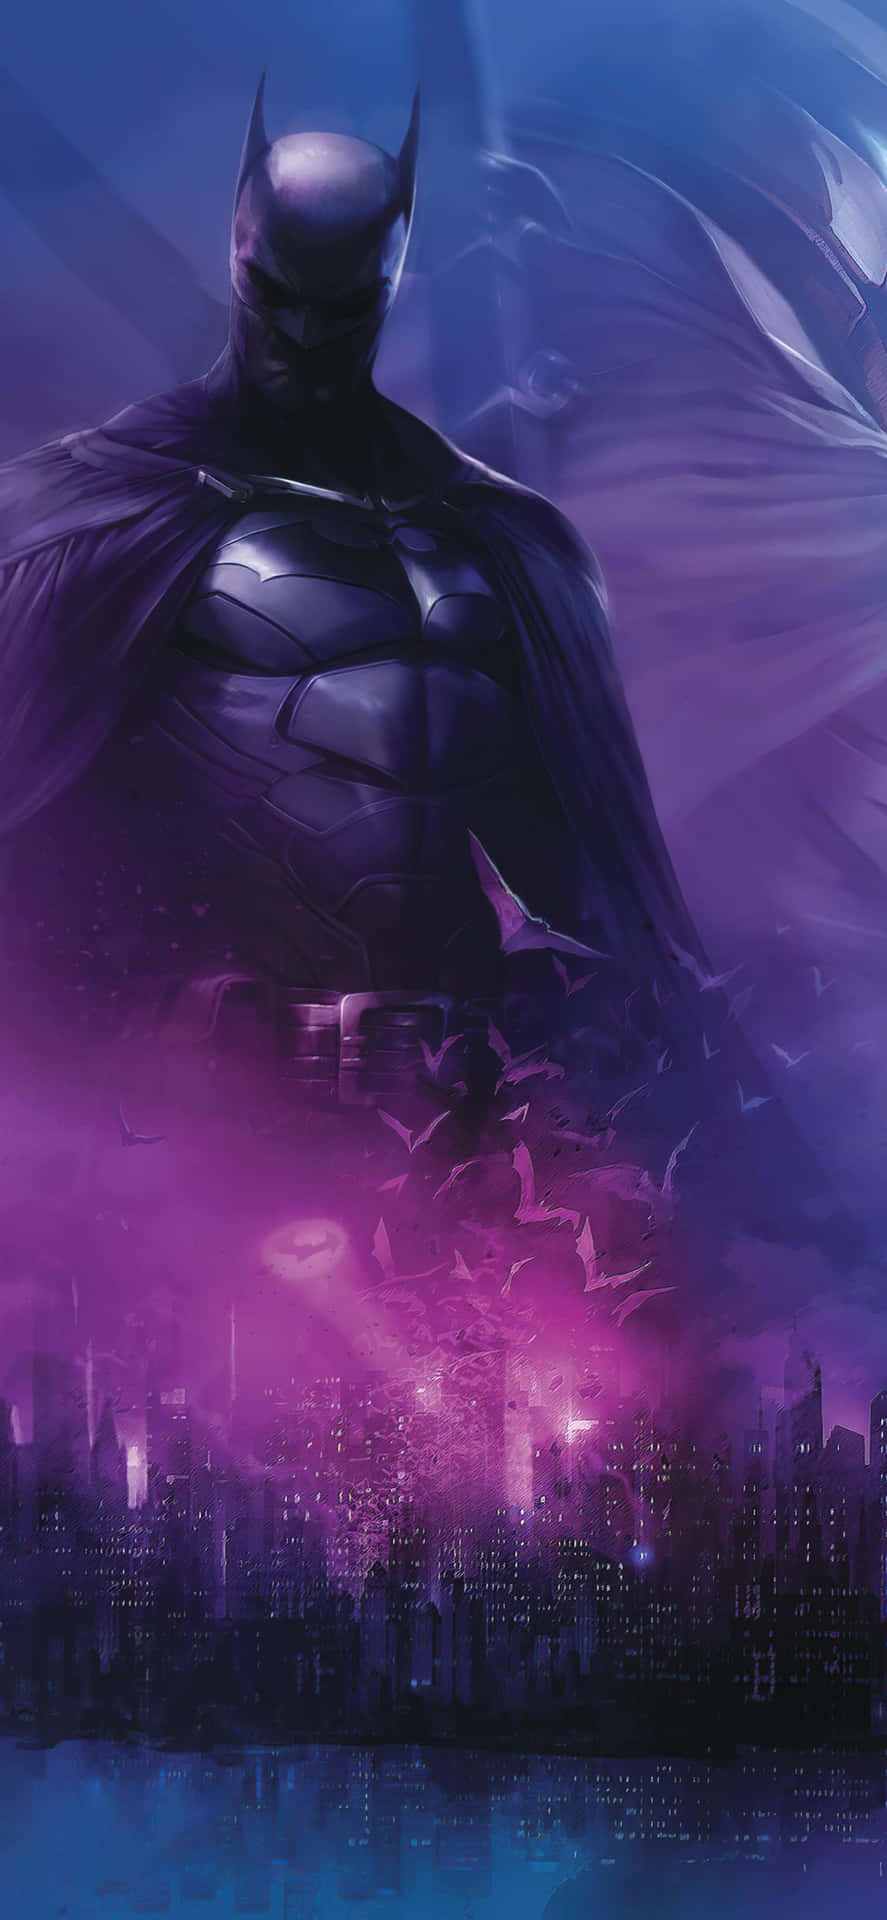 Standing tall, Awesome Batman is ready to protect the city Wallpaper